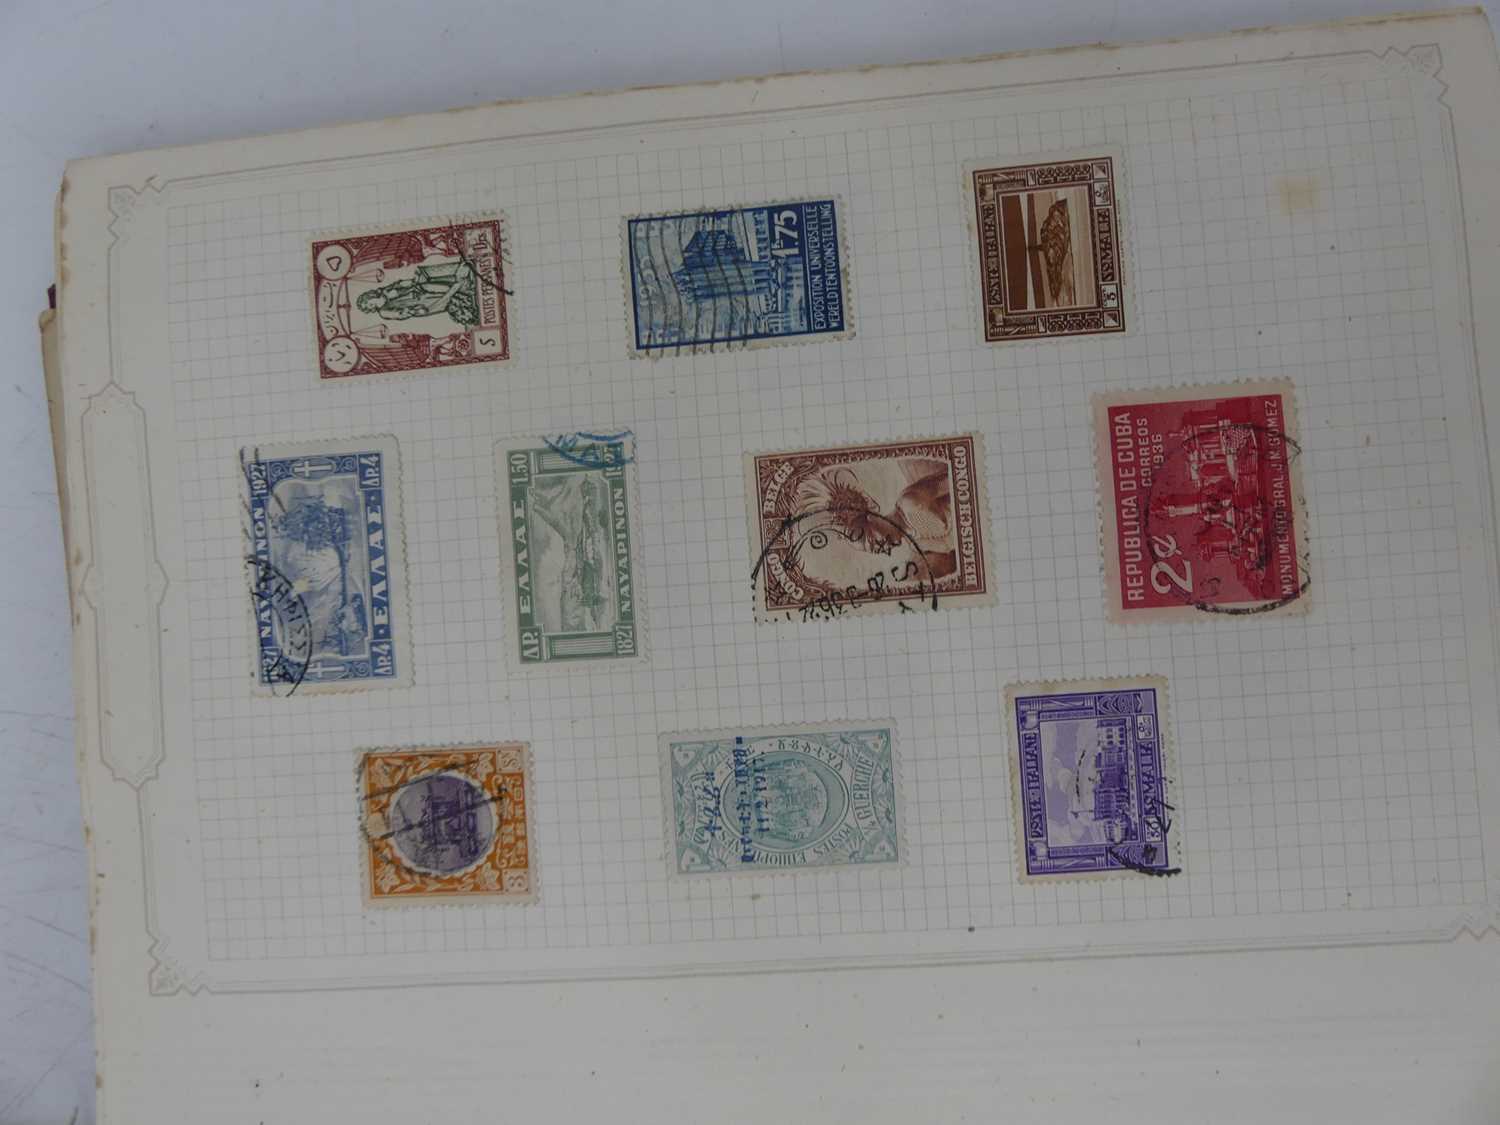 A Simplex Junior stamp album and contents ranging from Argentina to Poland, used 20th century - Image 2 of 2